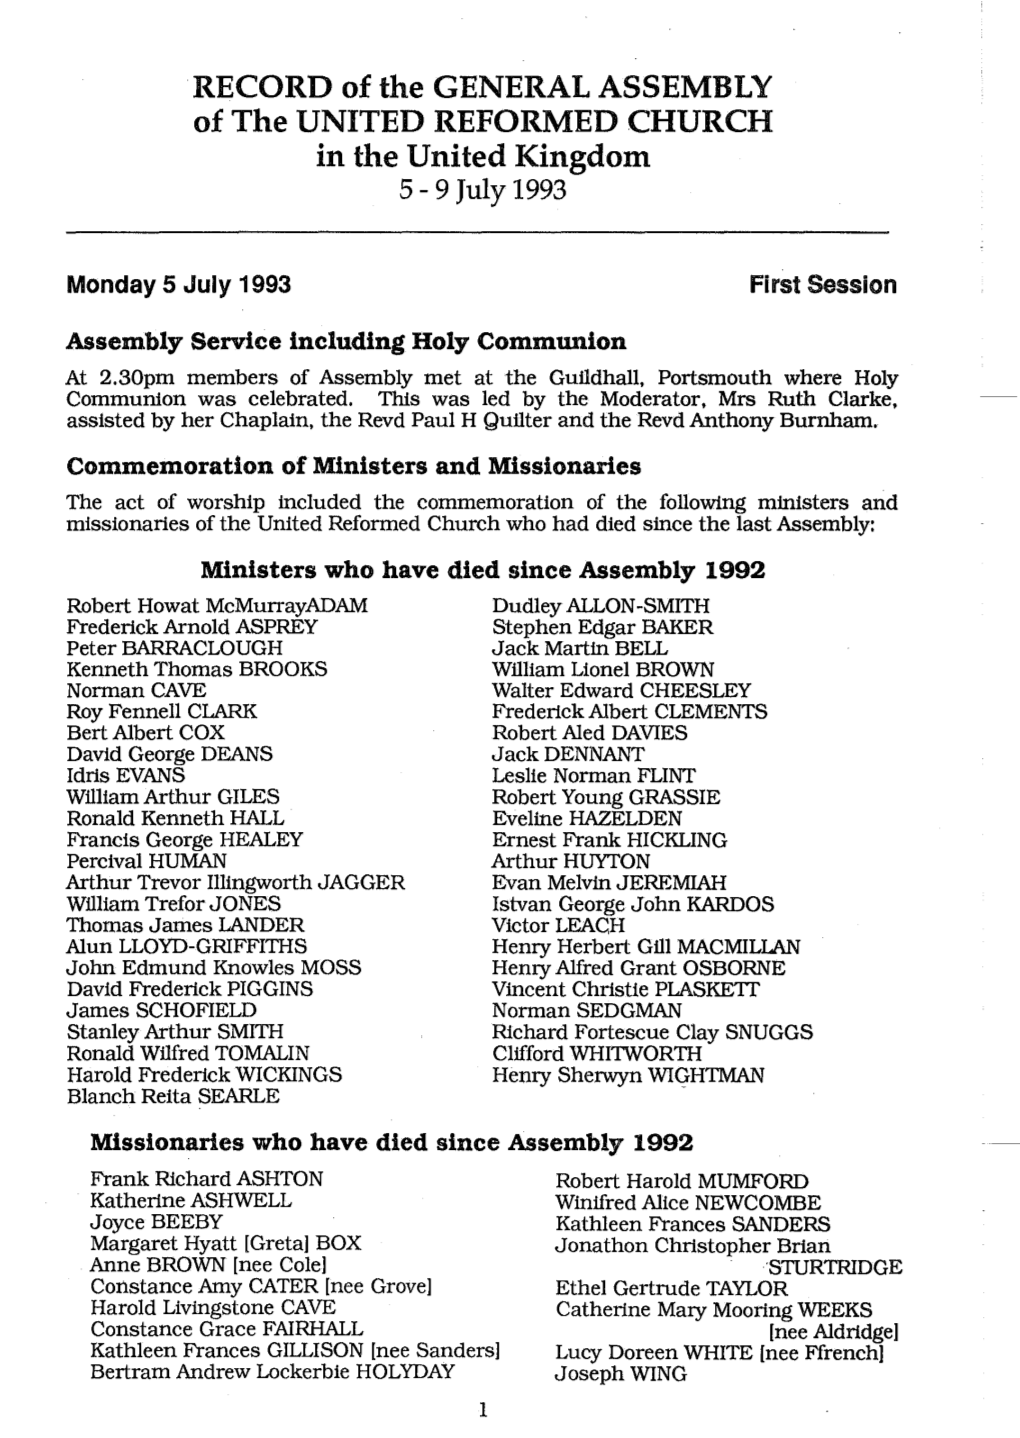 RECORD of the GENERAL ASSEMBLY of the UNITED REFORMED CHURCH in the United Kingdom 5- 9July1993